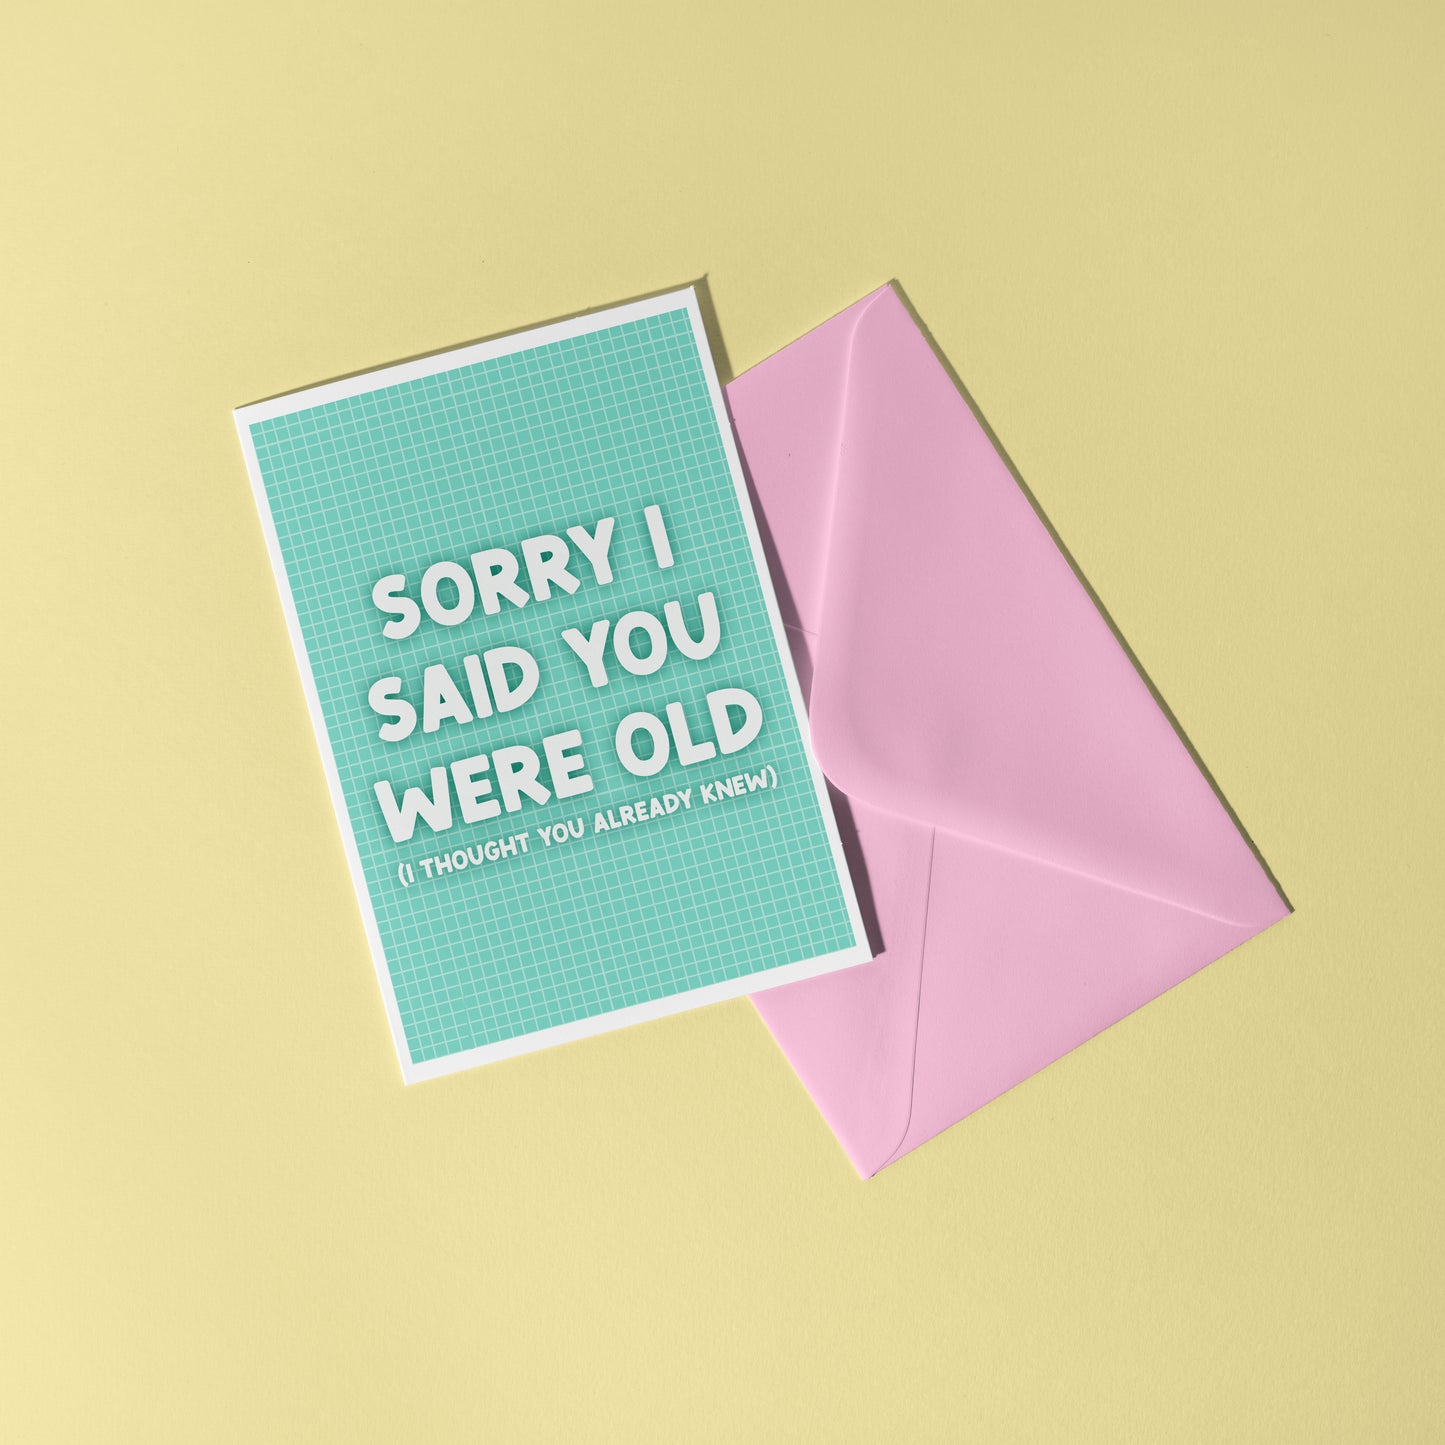 Sorry I Said You Were Old A6 Greetings Card in Teal